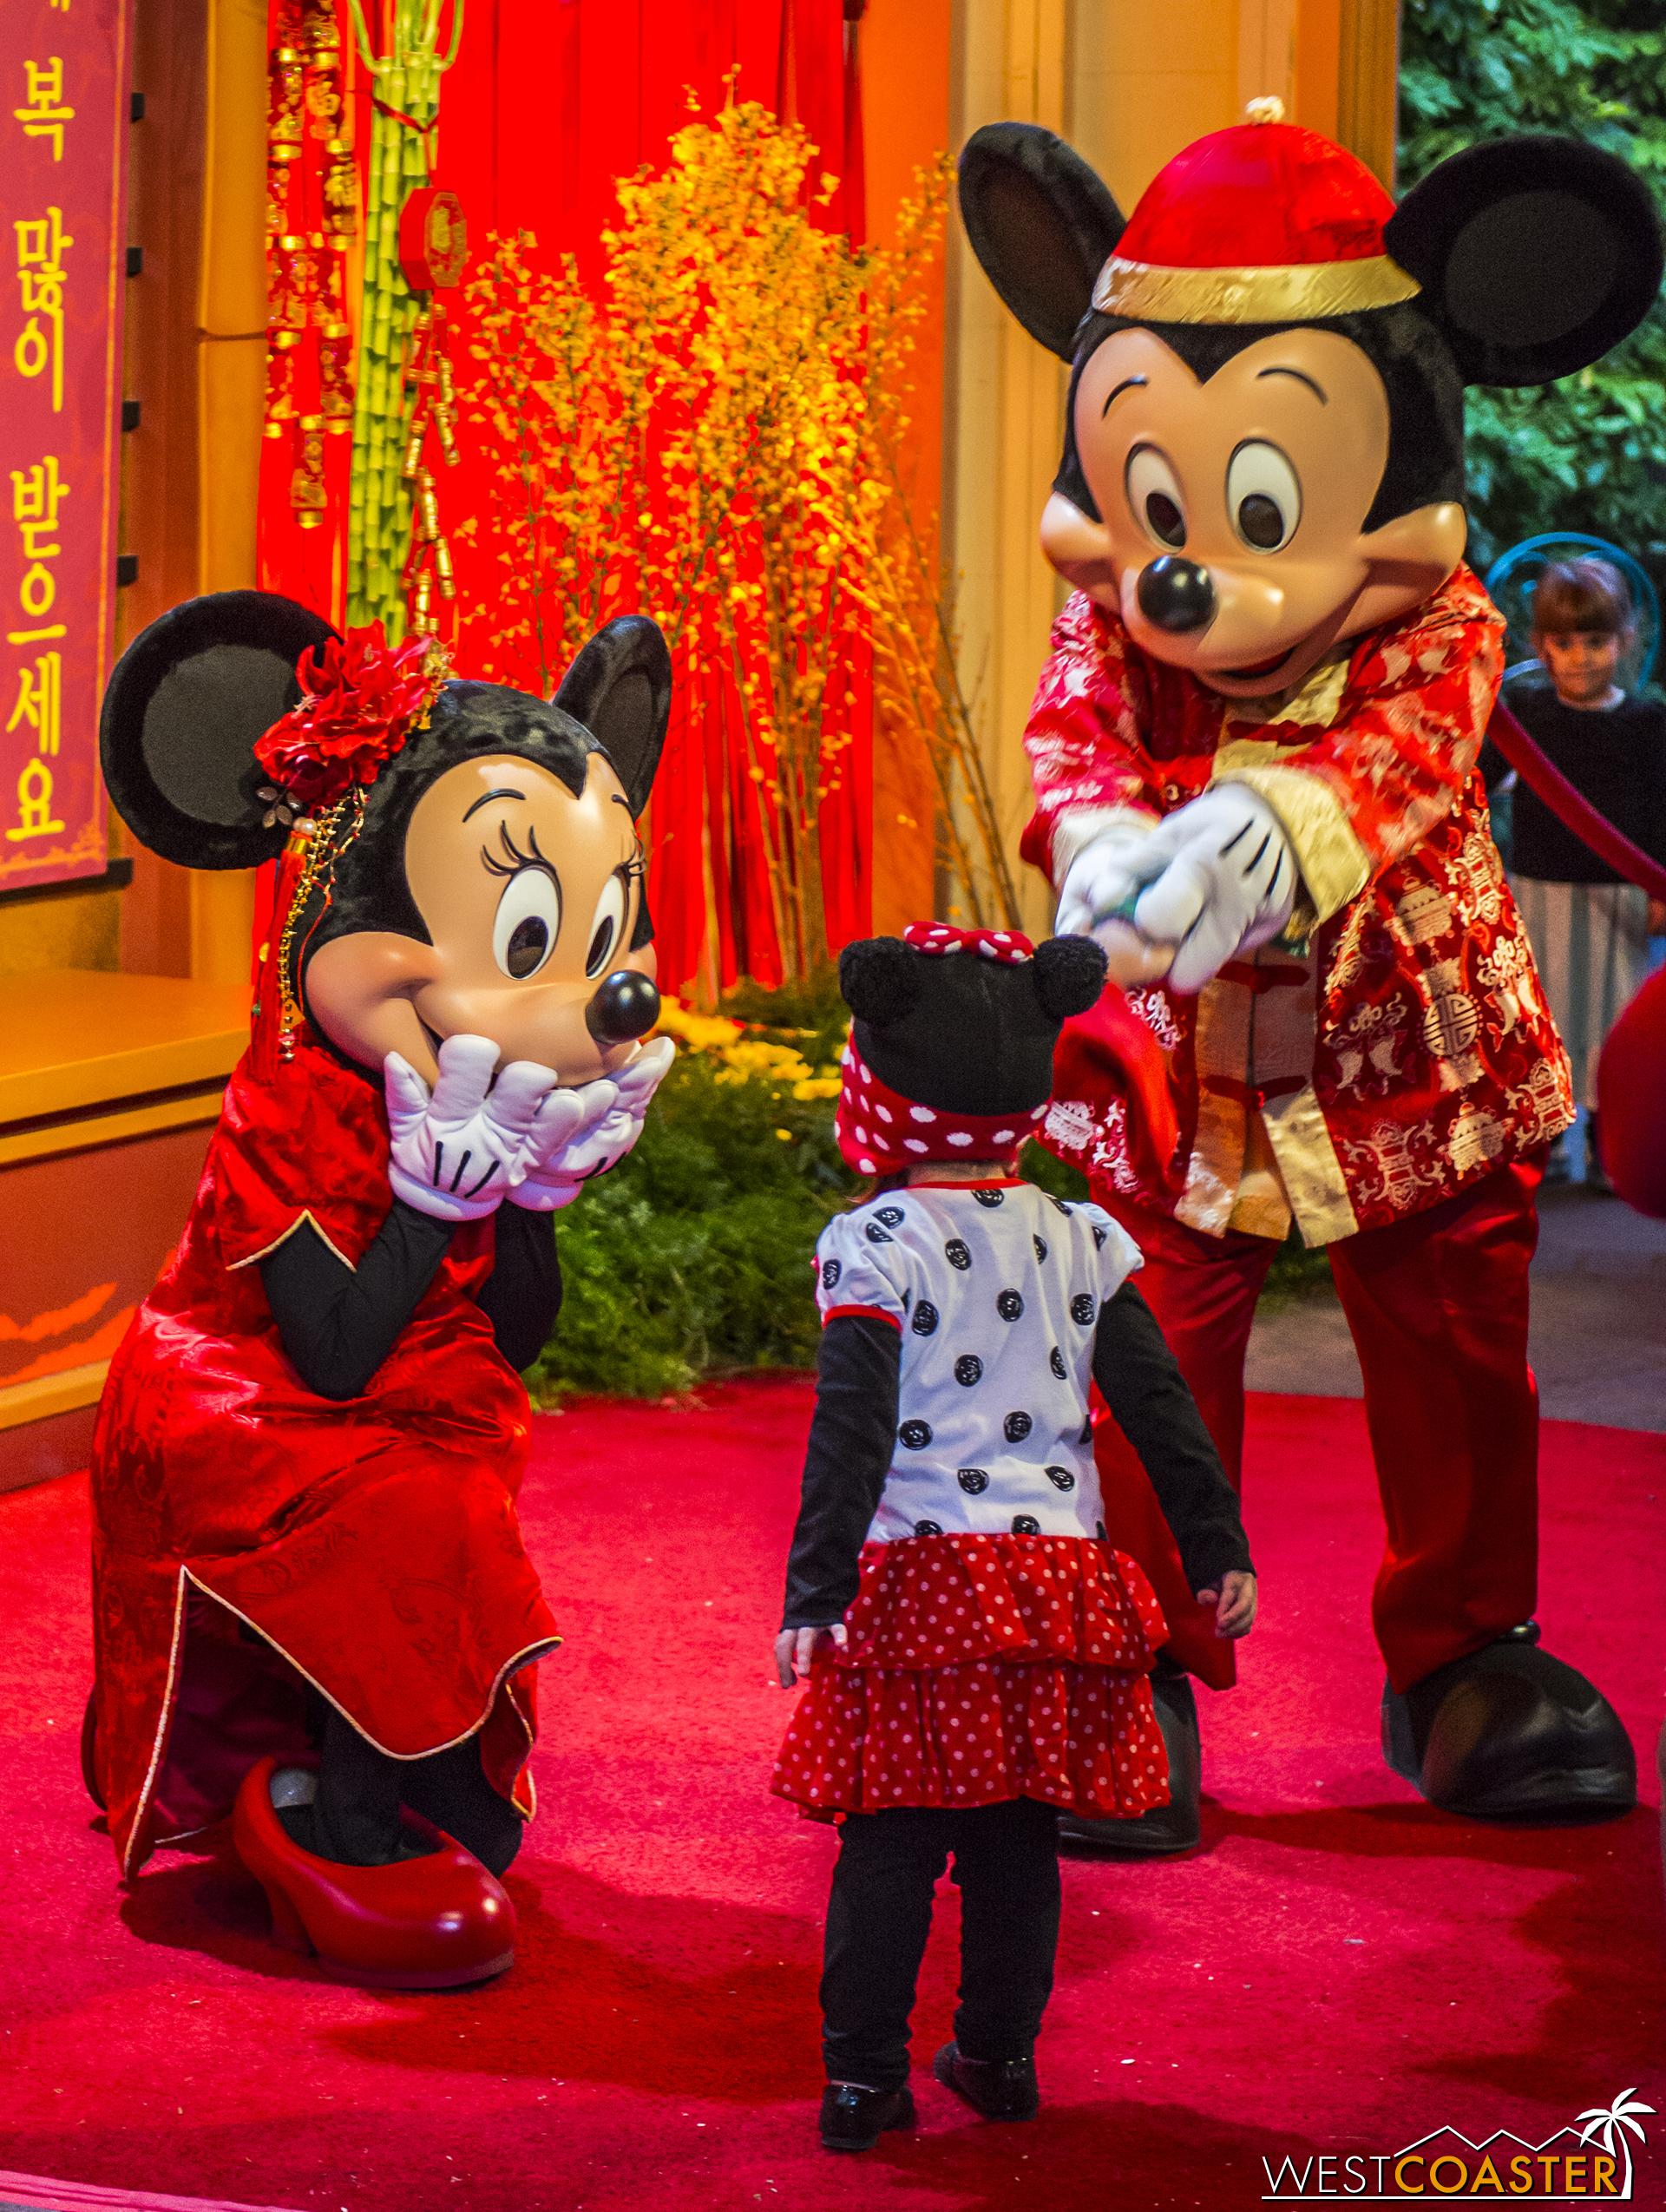  Mickey and Minnie are pleased to meet their adorable guest. 